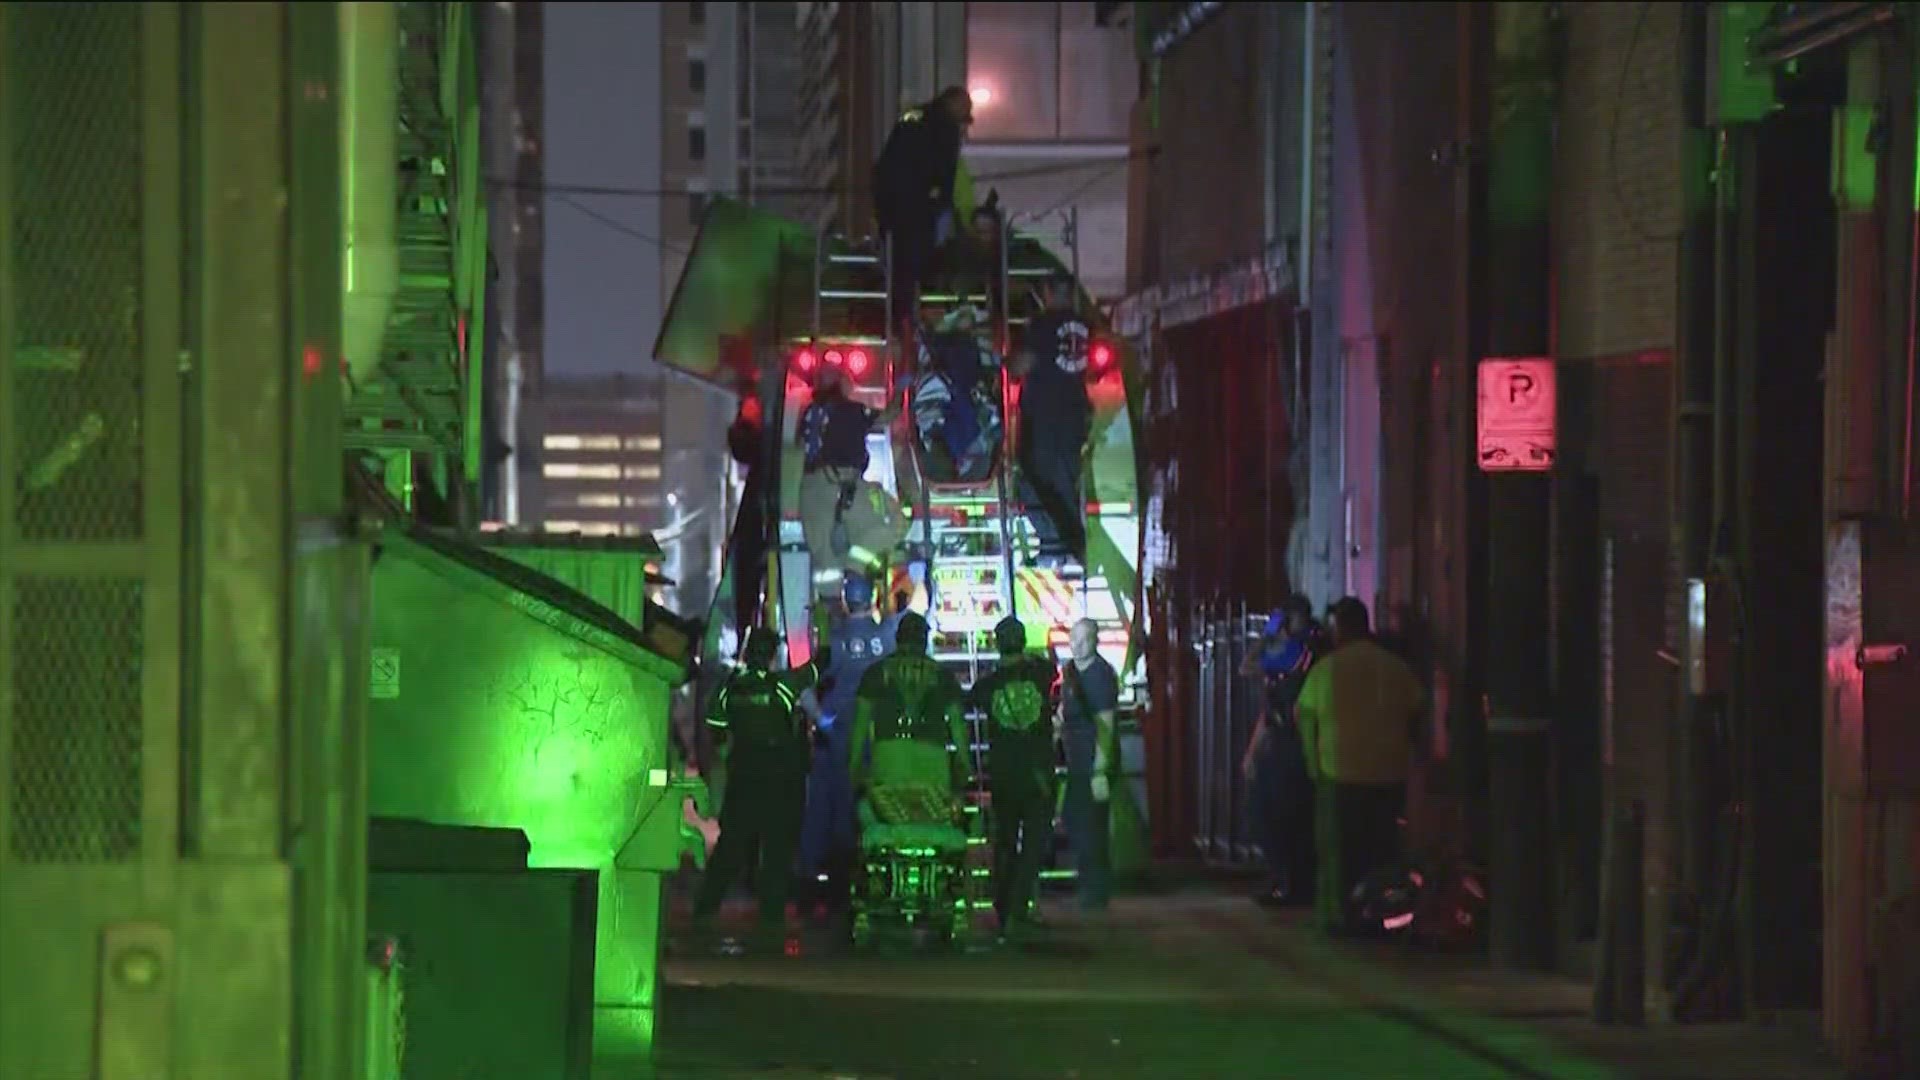 The man allegedly fell asleep in a recycling bin, which was picked up at approximately 3:30 a.m. in downtown Austin.